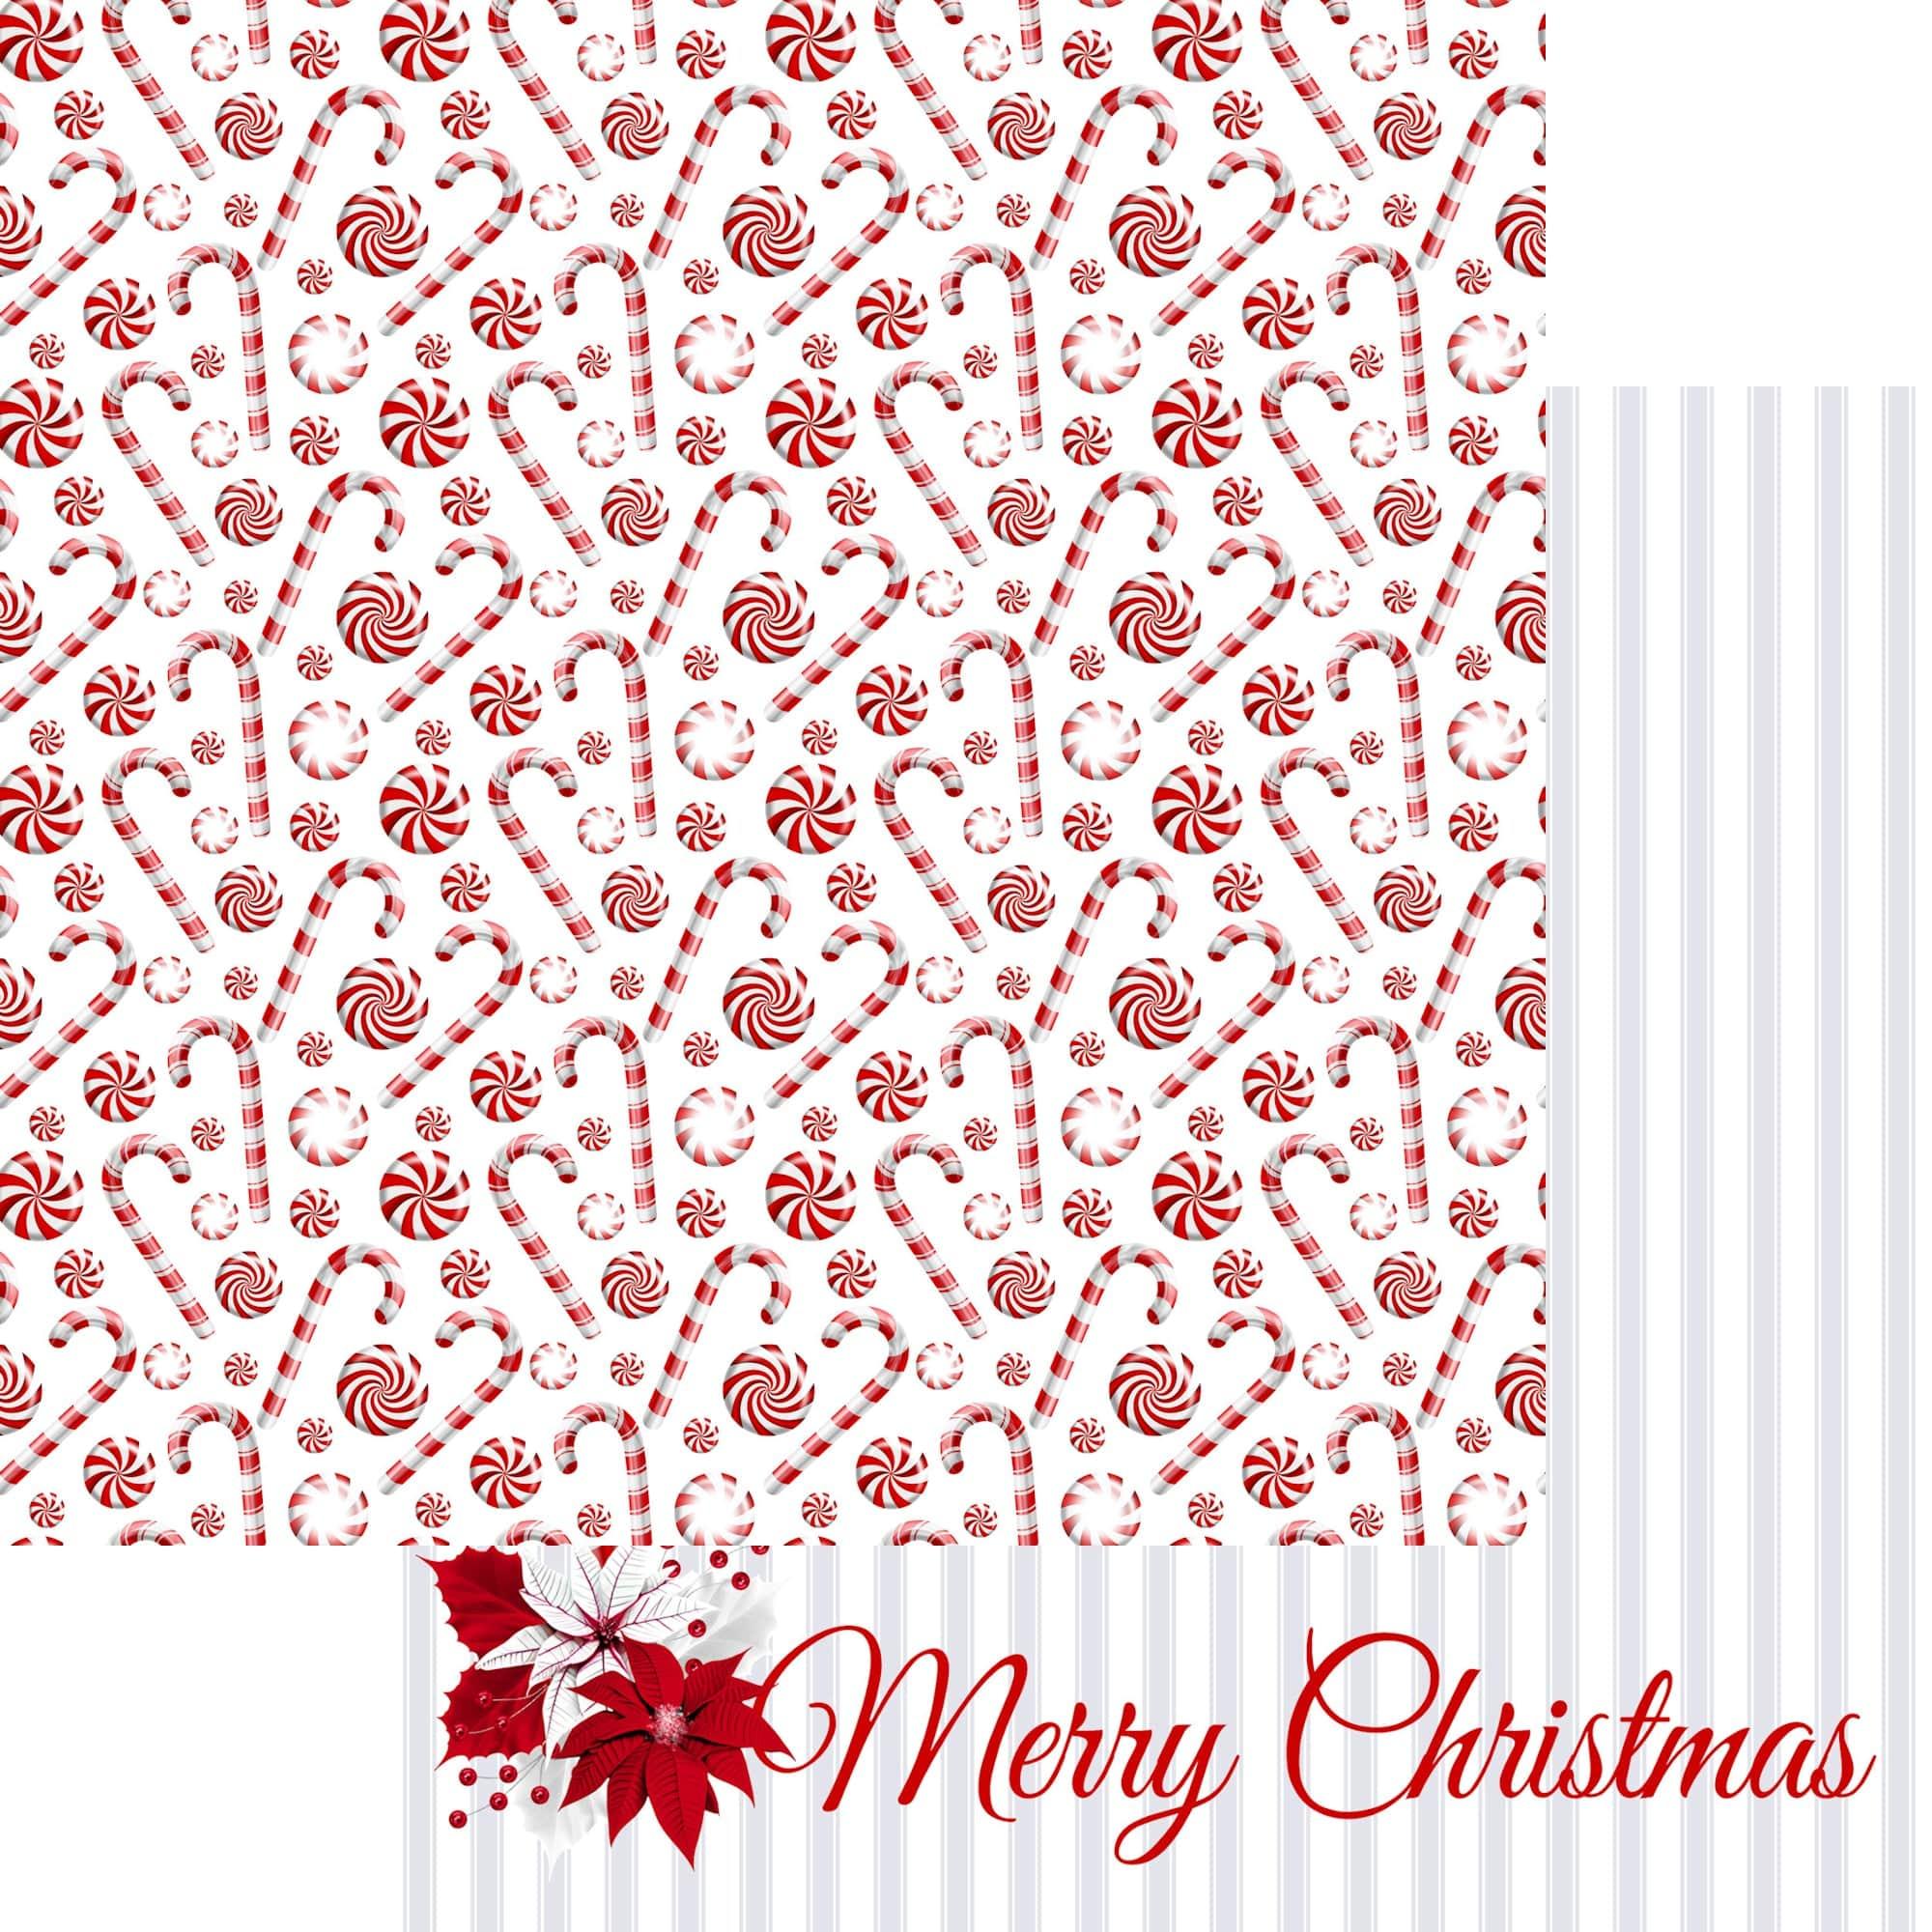 Peppermint Christmas Collection 12 x 12 Scrapbook Paper & Embellishment Kit by SSC Designs - Scrapbook Supply Companies